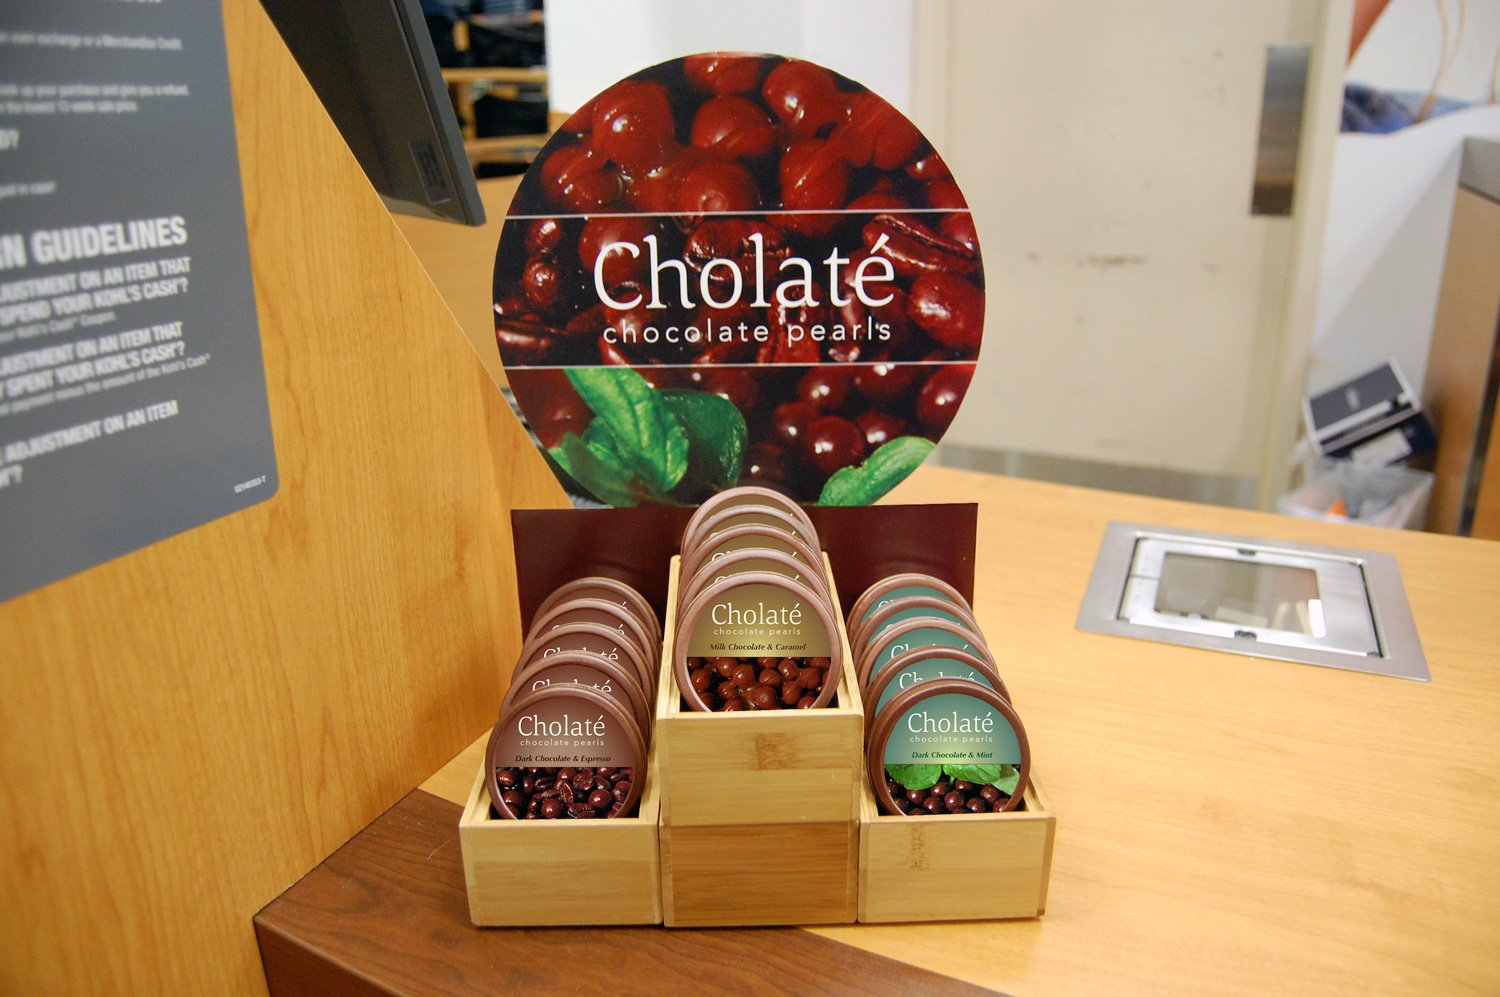 Cholate_Chocolate_Pearls_Brand_Identity_Point_of_Purchase_Display_2.jpg